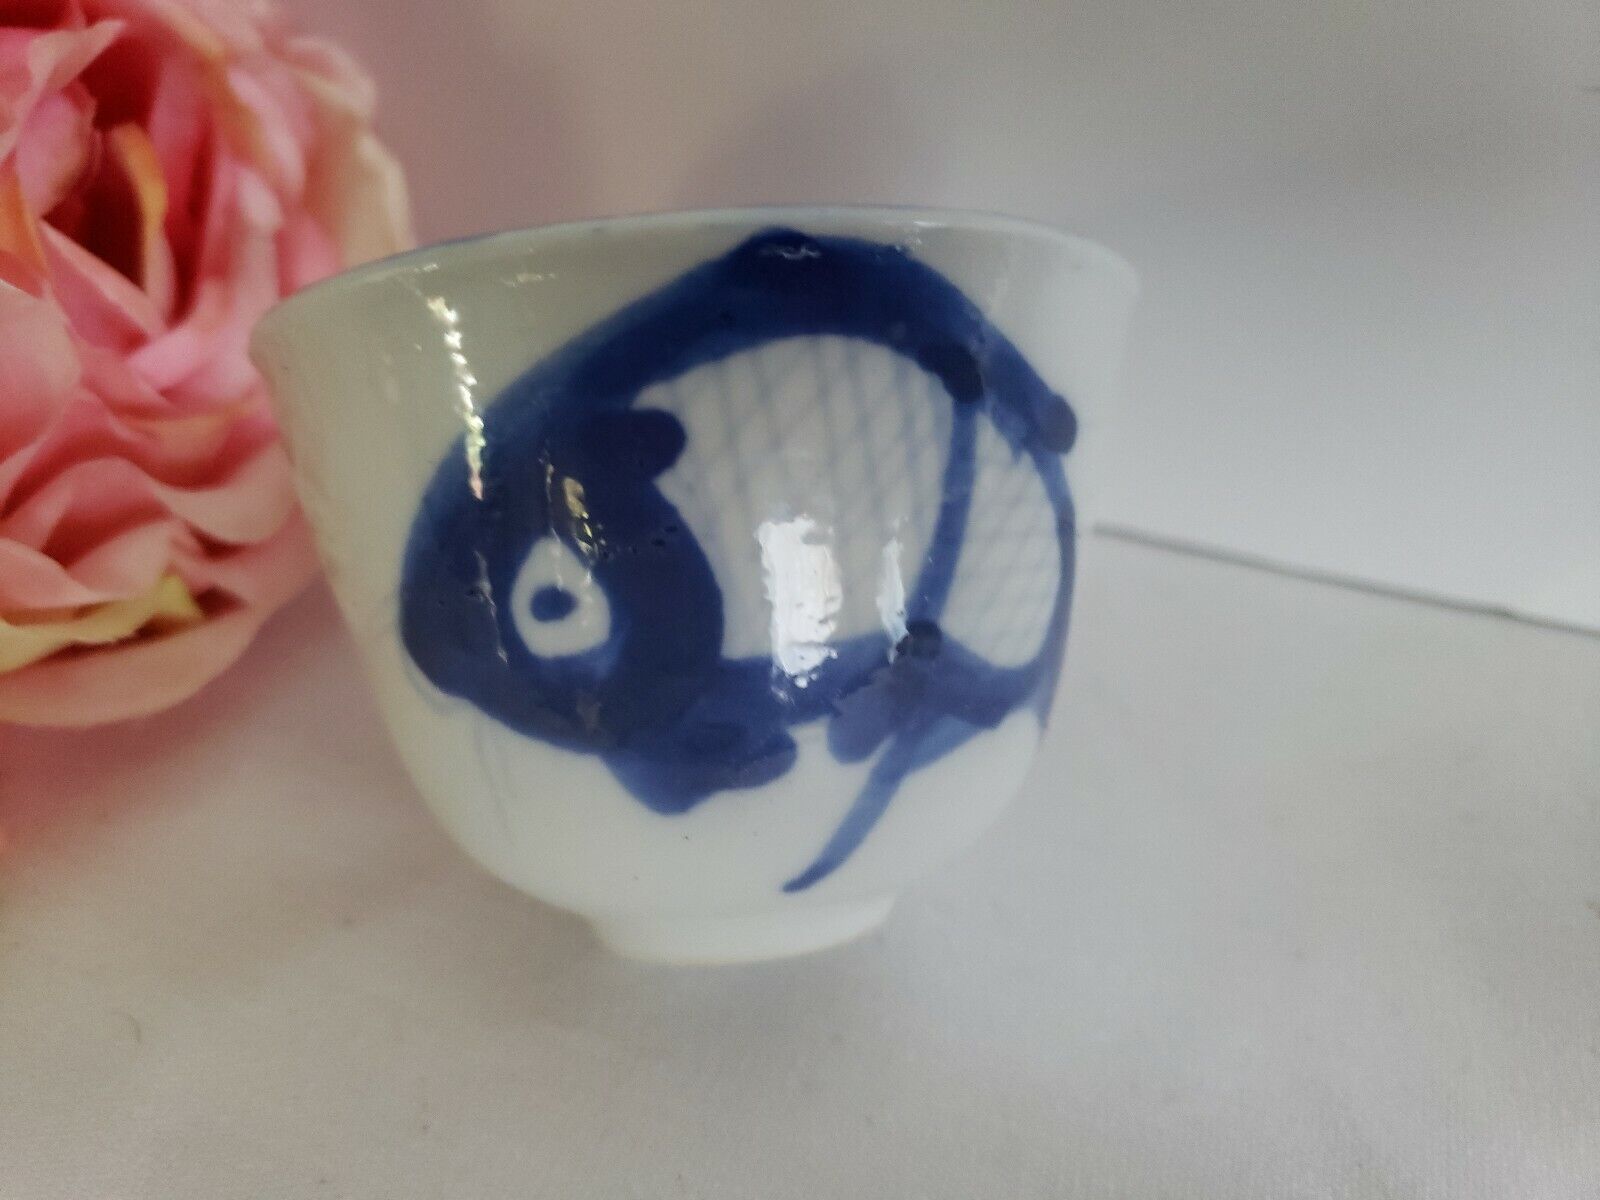 CX21 by China (Made in China) - Sake Cup - DISCONTINUED PATTERN